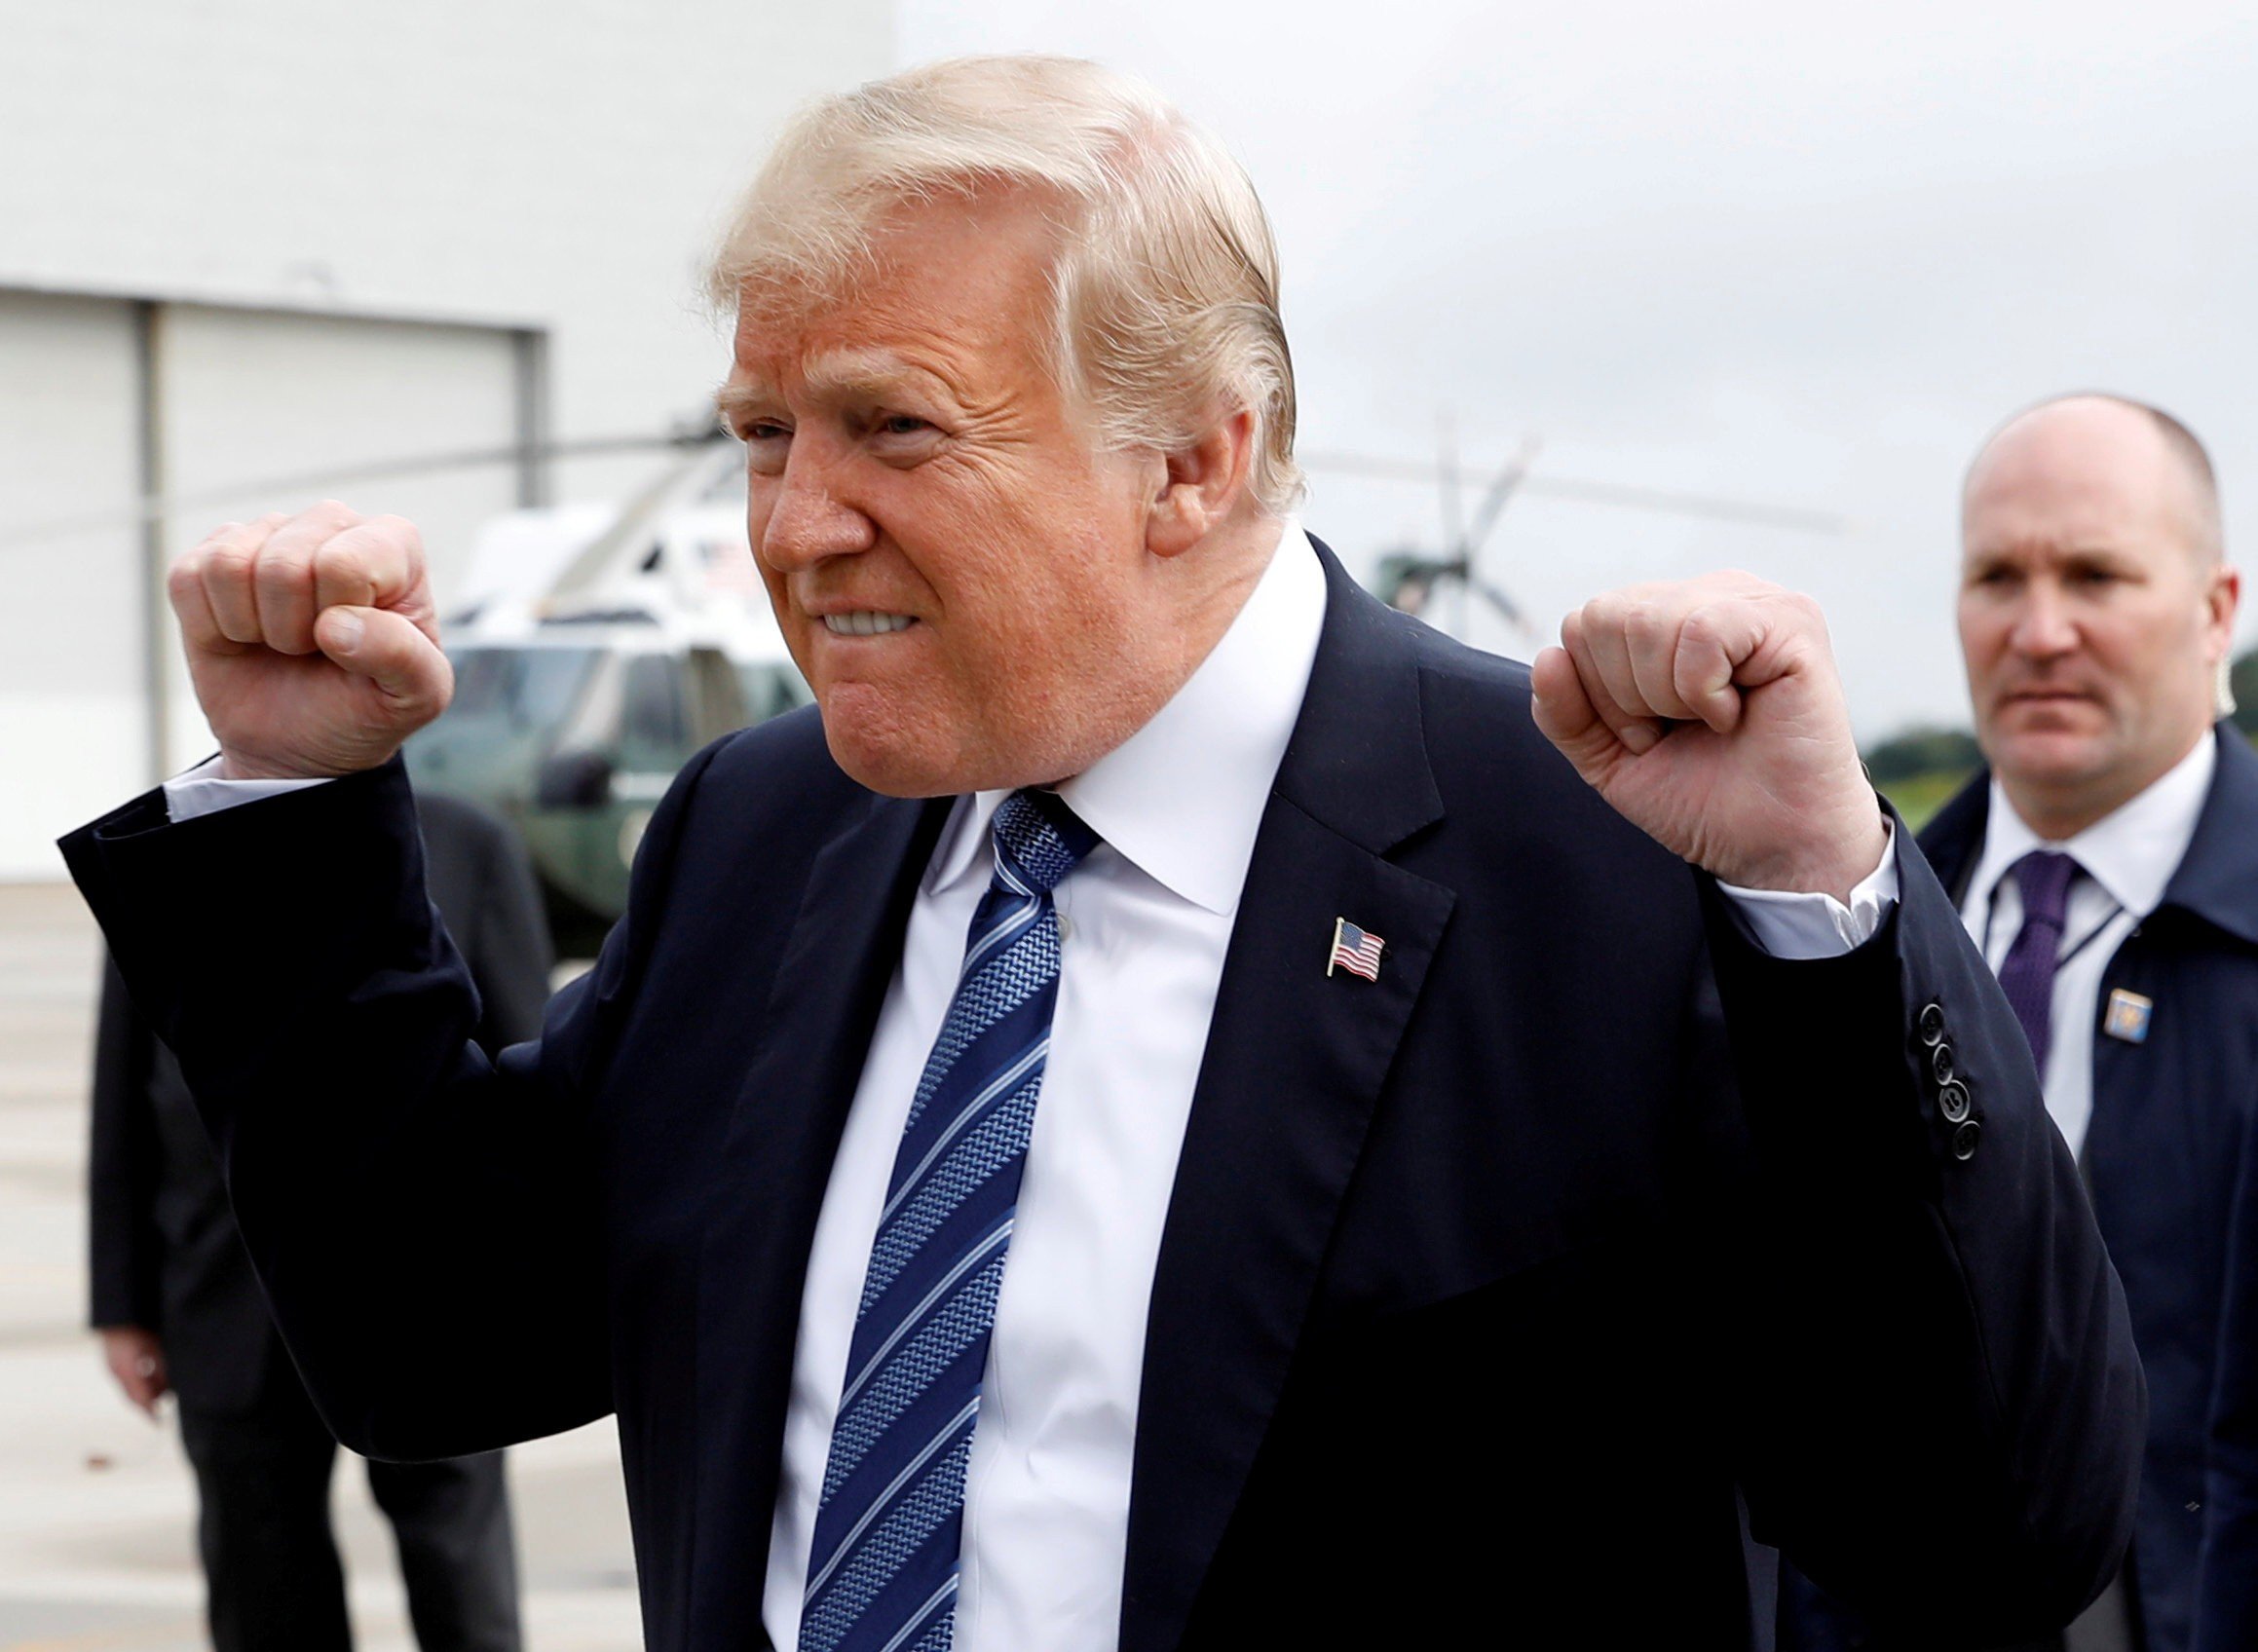 US President Donald Trump arrives in Johnstown, Pennsylvania, to take part in the 17th annual September 11 observance at the Flight 93 National Memorial. Trump’s response to reports of his instability and lack of fitness for the presidency has been to attack the credibility of the source of the claims and emphasise the US economy’s strong performance. Photo: Reuters